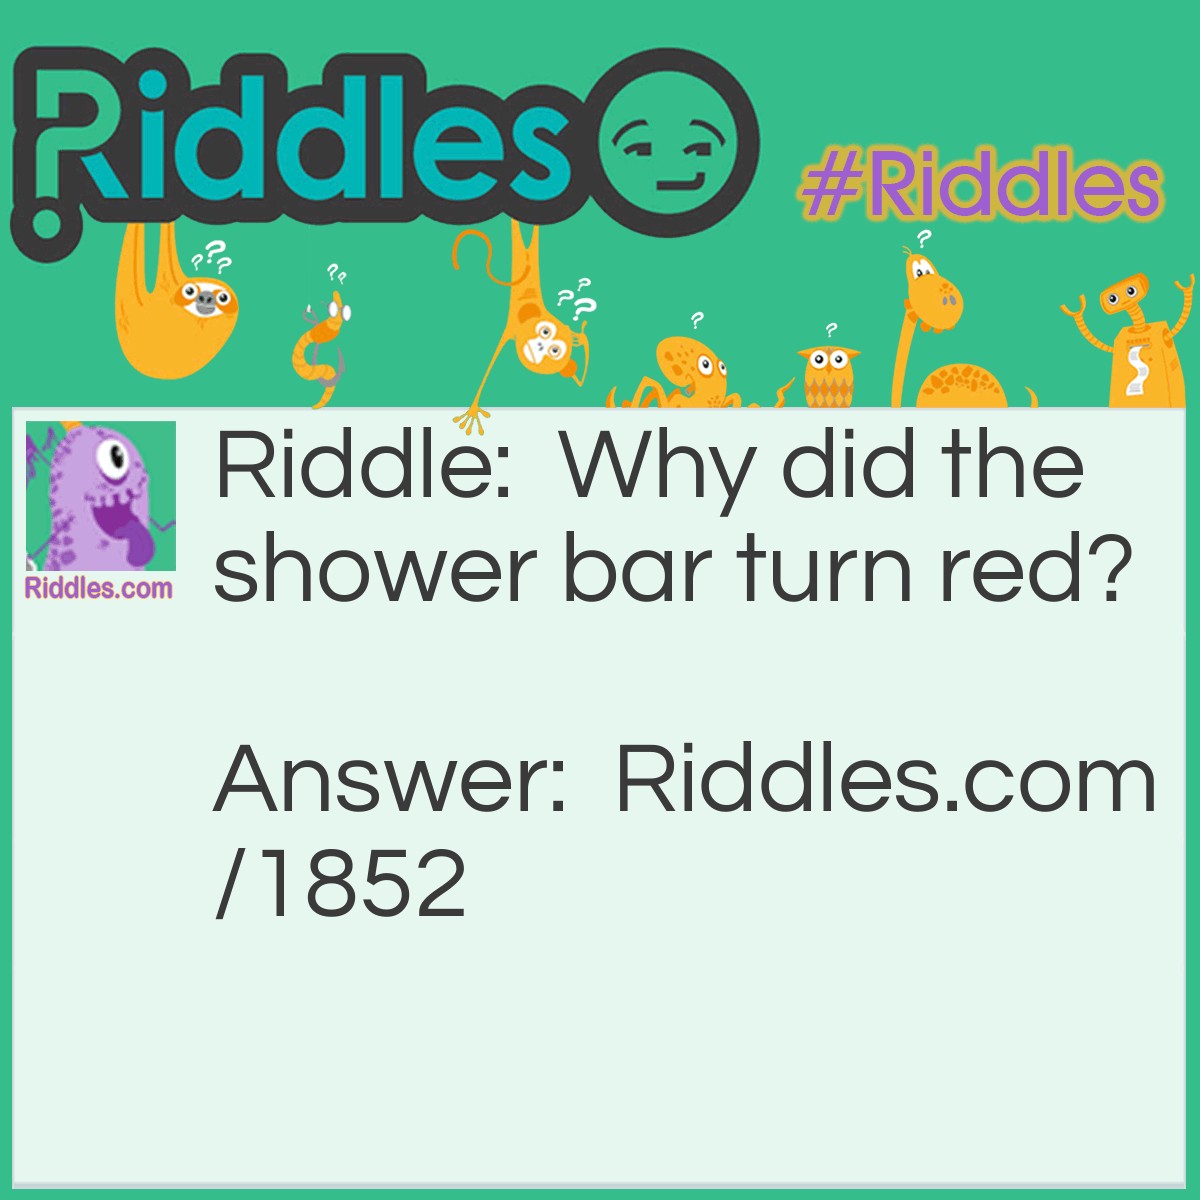 Riddle: Why did the shower bar turn red? Answer: It's towel fell off.